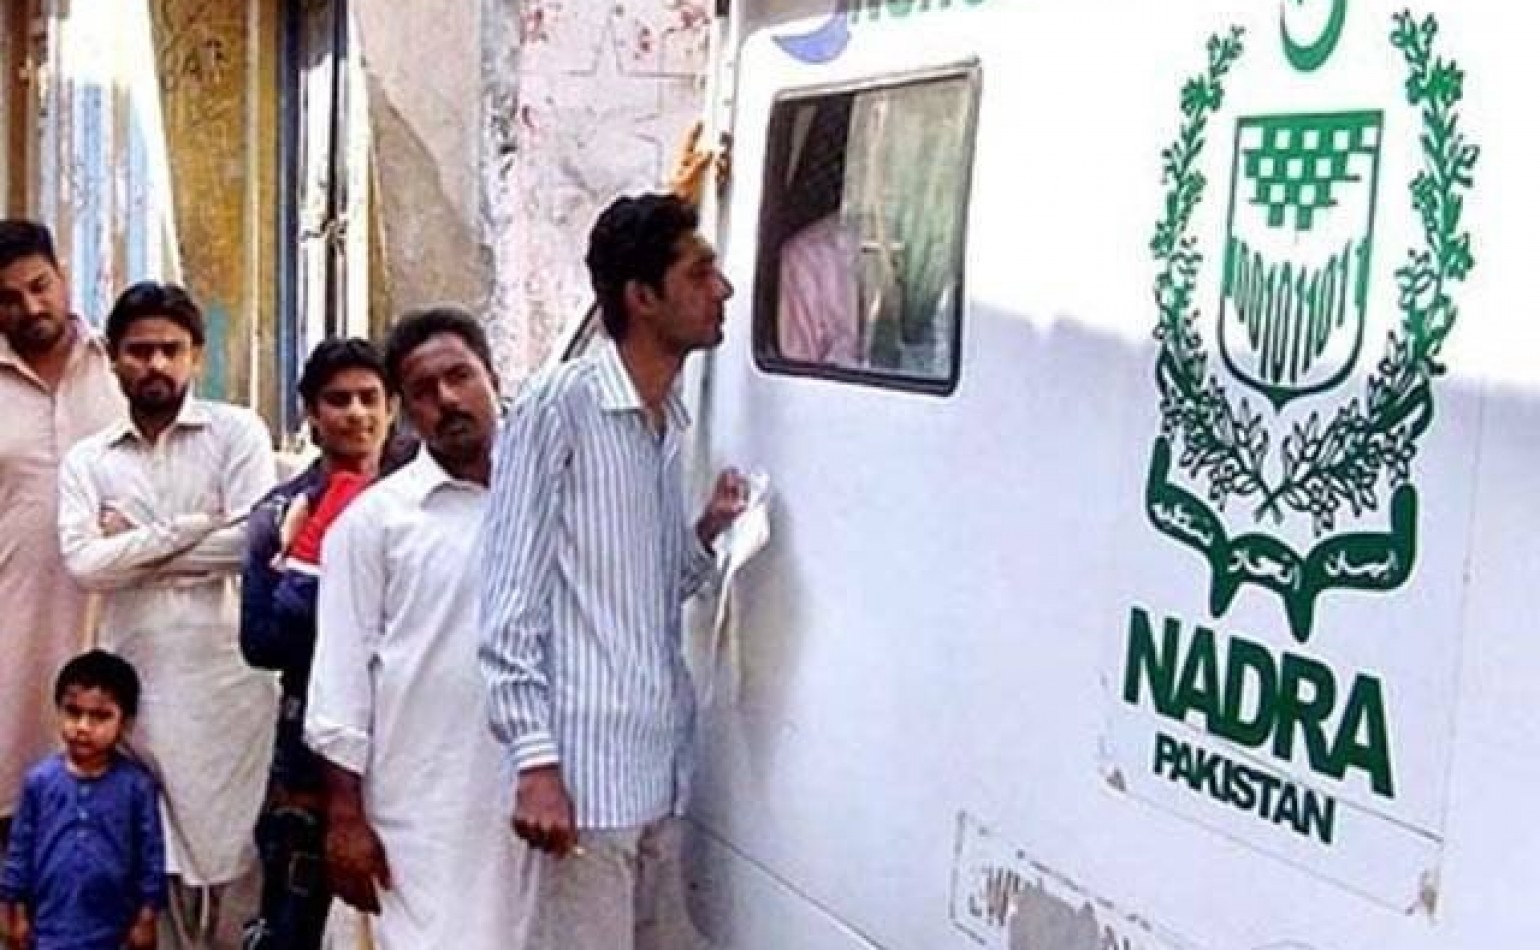 MMFD calls for an immediate investigation into the alleged breach of NADRA citizens’ data and the involvement of Punjab government officials